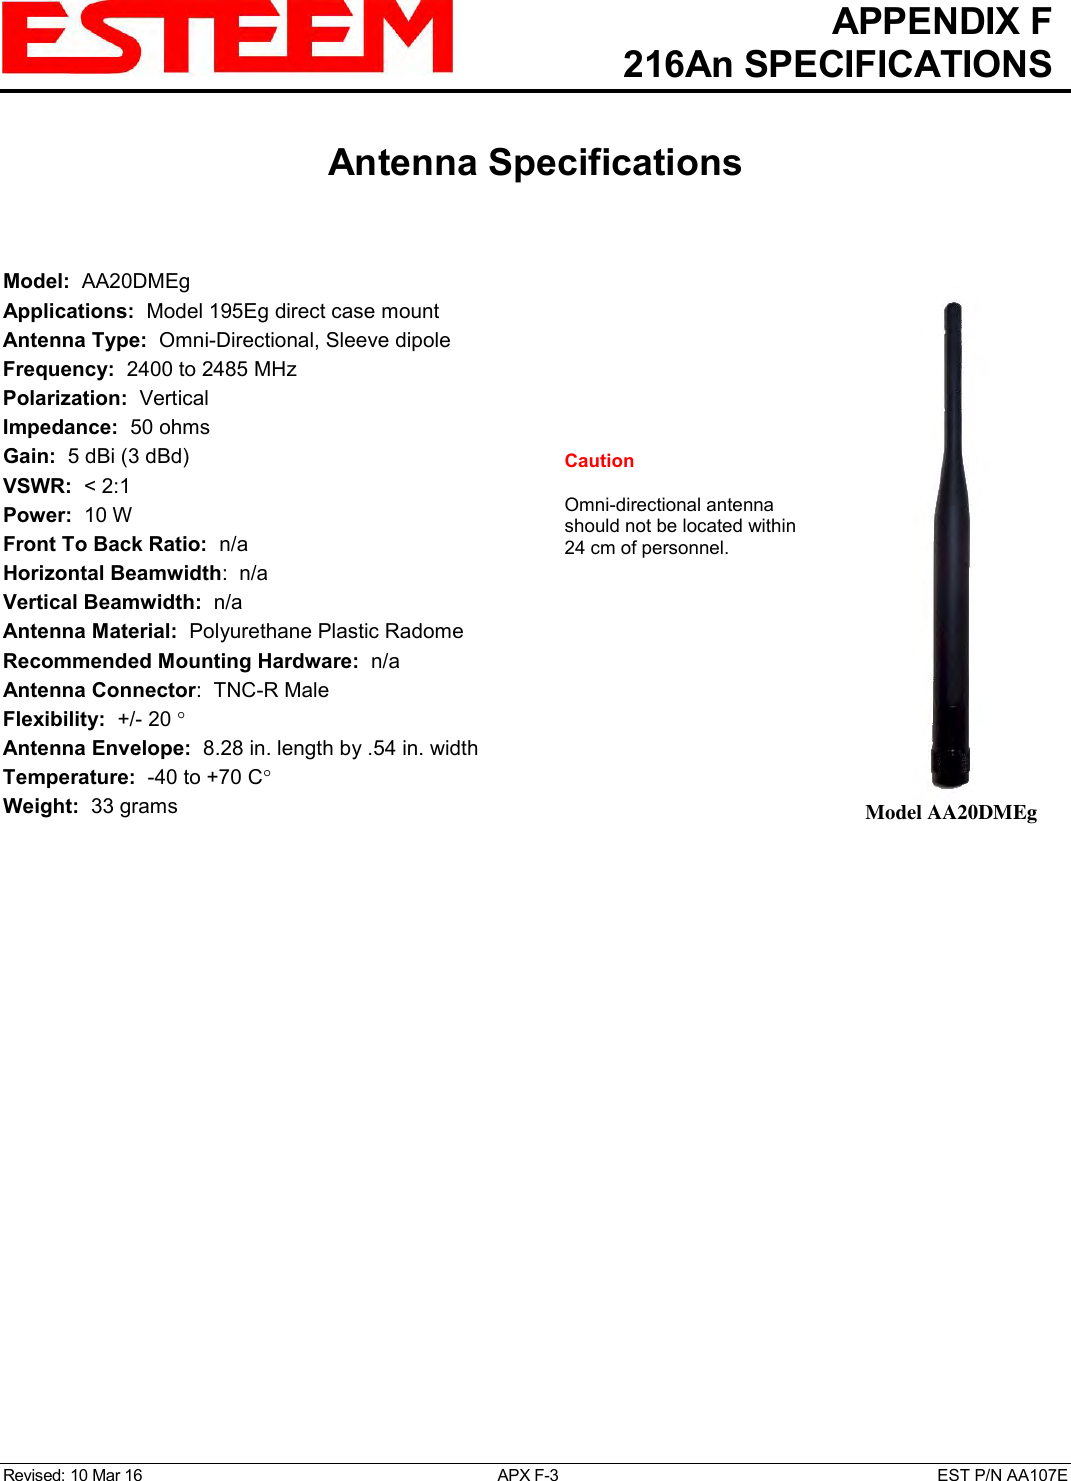   APPENDIX F   216An SPECIFICATIONS   Antenna Specifications   Revised: 10 Mar 16  APX F-3  EST P/N AA107E  Model:  AA20DMEg  Applications:  Model 195Eg direct case mount Antenna Type:  Omni-Directional, Sleeve dipole Frequency:  2400 to 2485 MHz Polarization:  Vertical Impedance:  50 ohms Gain:  5 dBi (3 dBd) VSWR:  &lt; 2:1  Power:  10 W  Front To Back Ratio:  n/a Horizontal Beamwidth:  n/a Vertical Beamwidth:  n/a Antenna Material:  Polyurethane Plastic Radome  Recommended Mounting Hardware:  n/a Antenna Connector:  TNC-R Male  Flexibility:  +/- 20   Antenna Envelope:  8.28 in. length by .54 in. width Temperature:  -40 to +70 C  Weight:  33 grams   Model AA20DMEg Caution  Omni-directional antenna should not be located within 24 cm of personnel.  